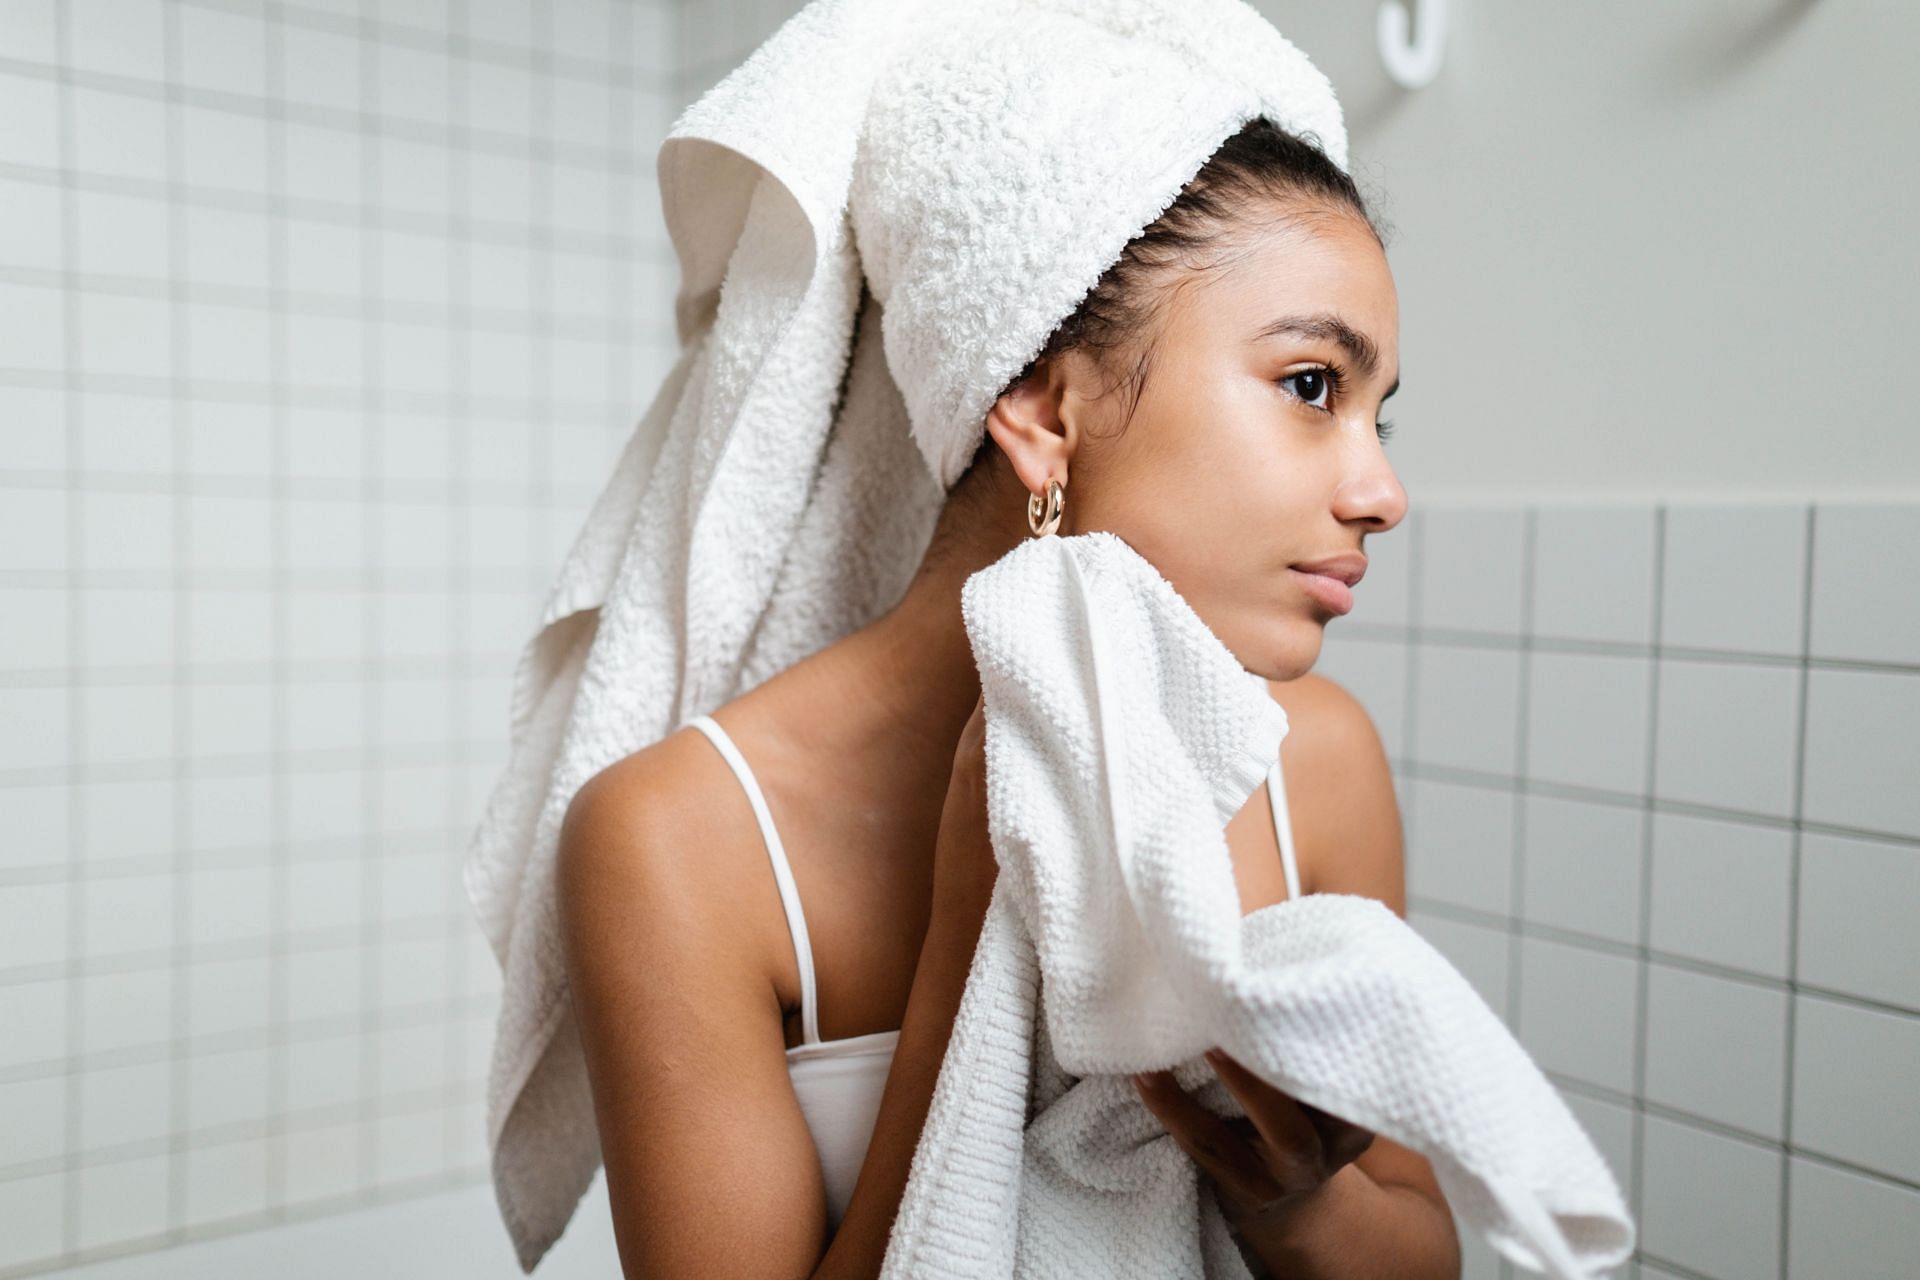 Itchy skin after shower (Image via Pexels/Ron Lach)